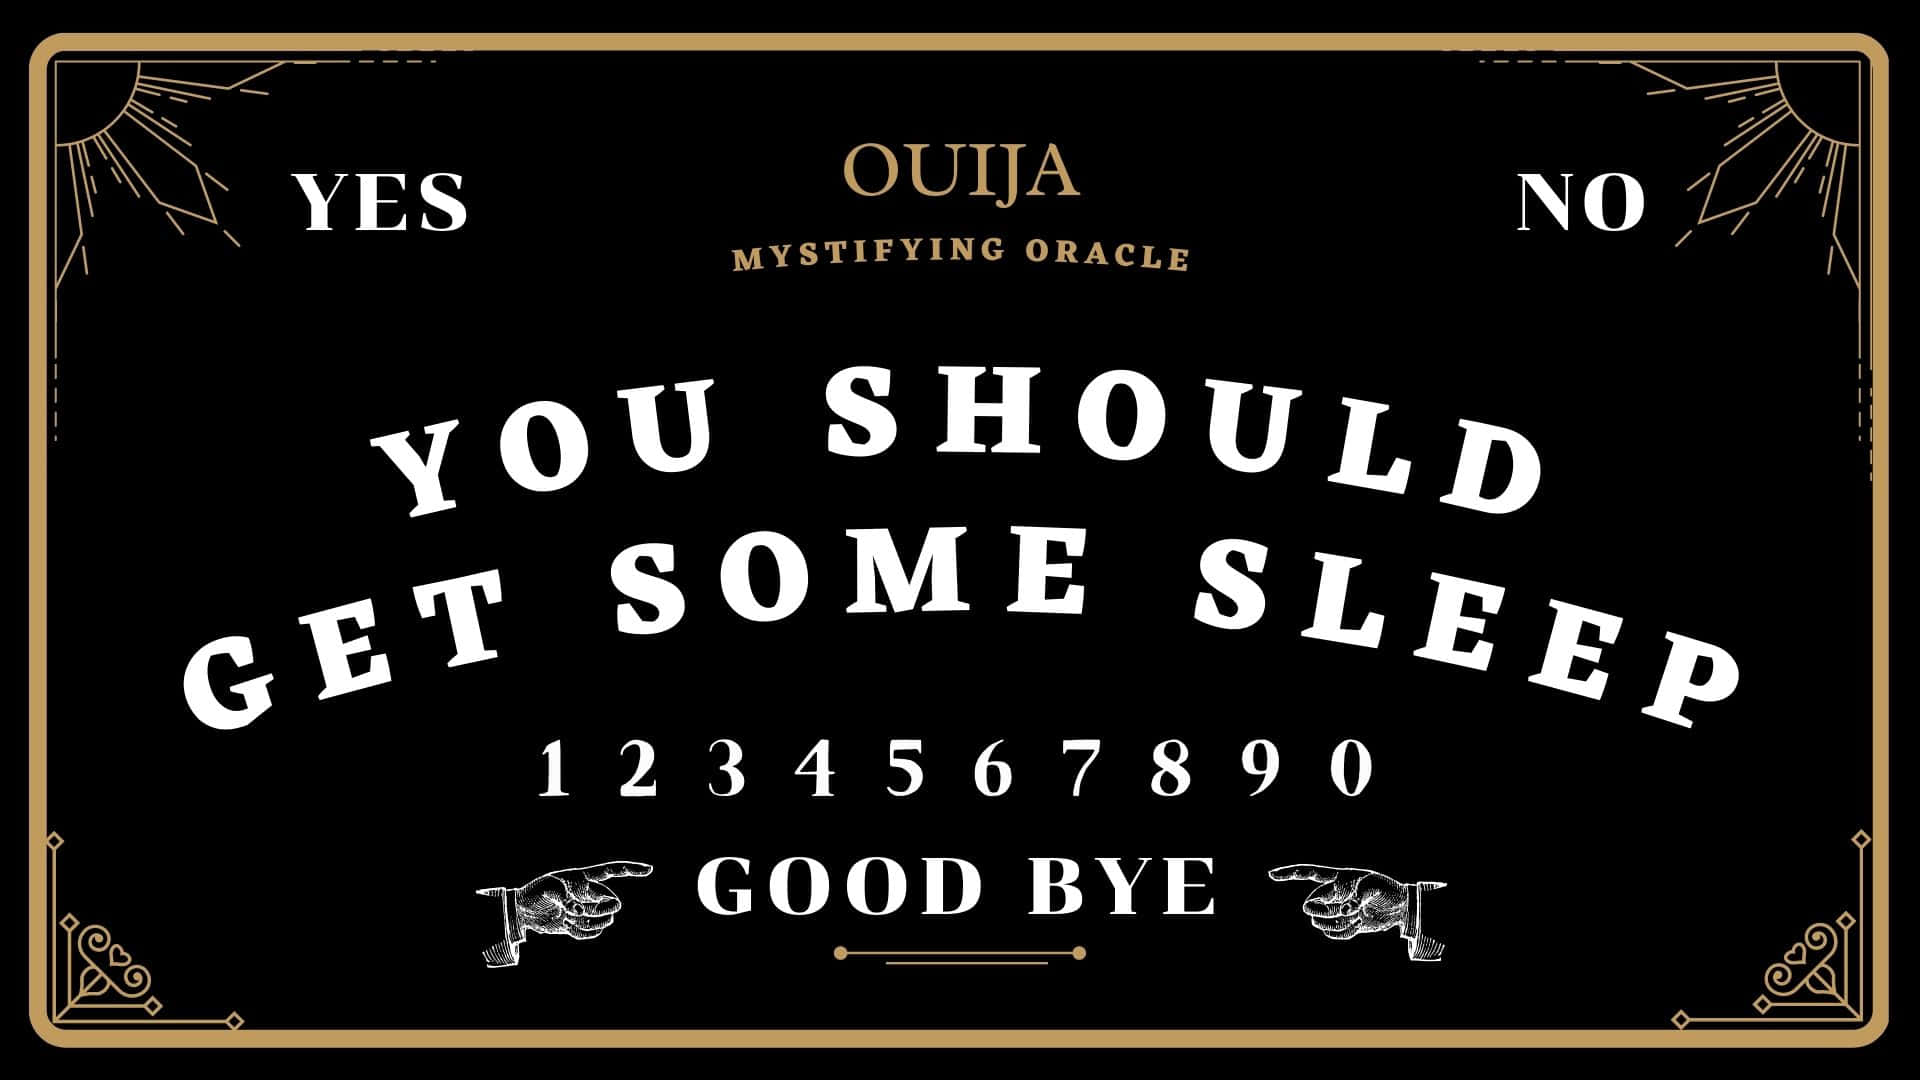 Make contact with the spirit world with this Ouija board Wallpaper